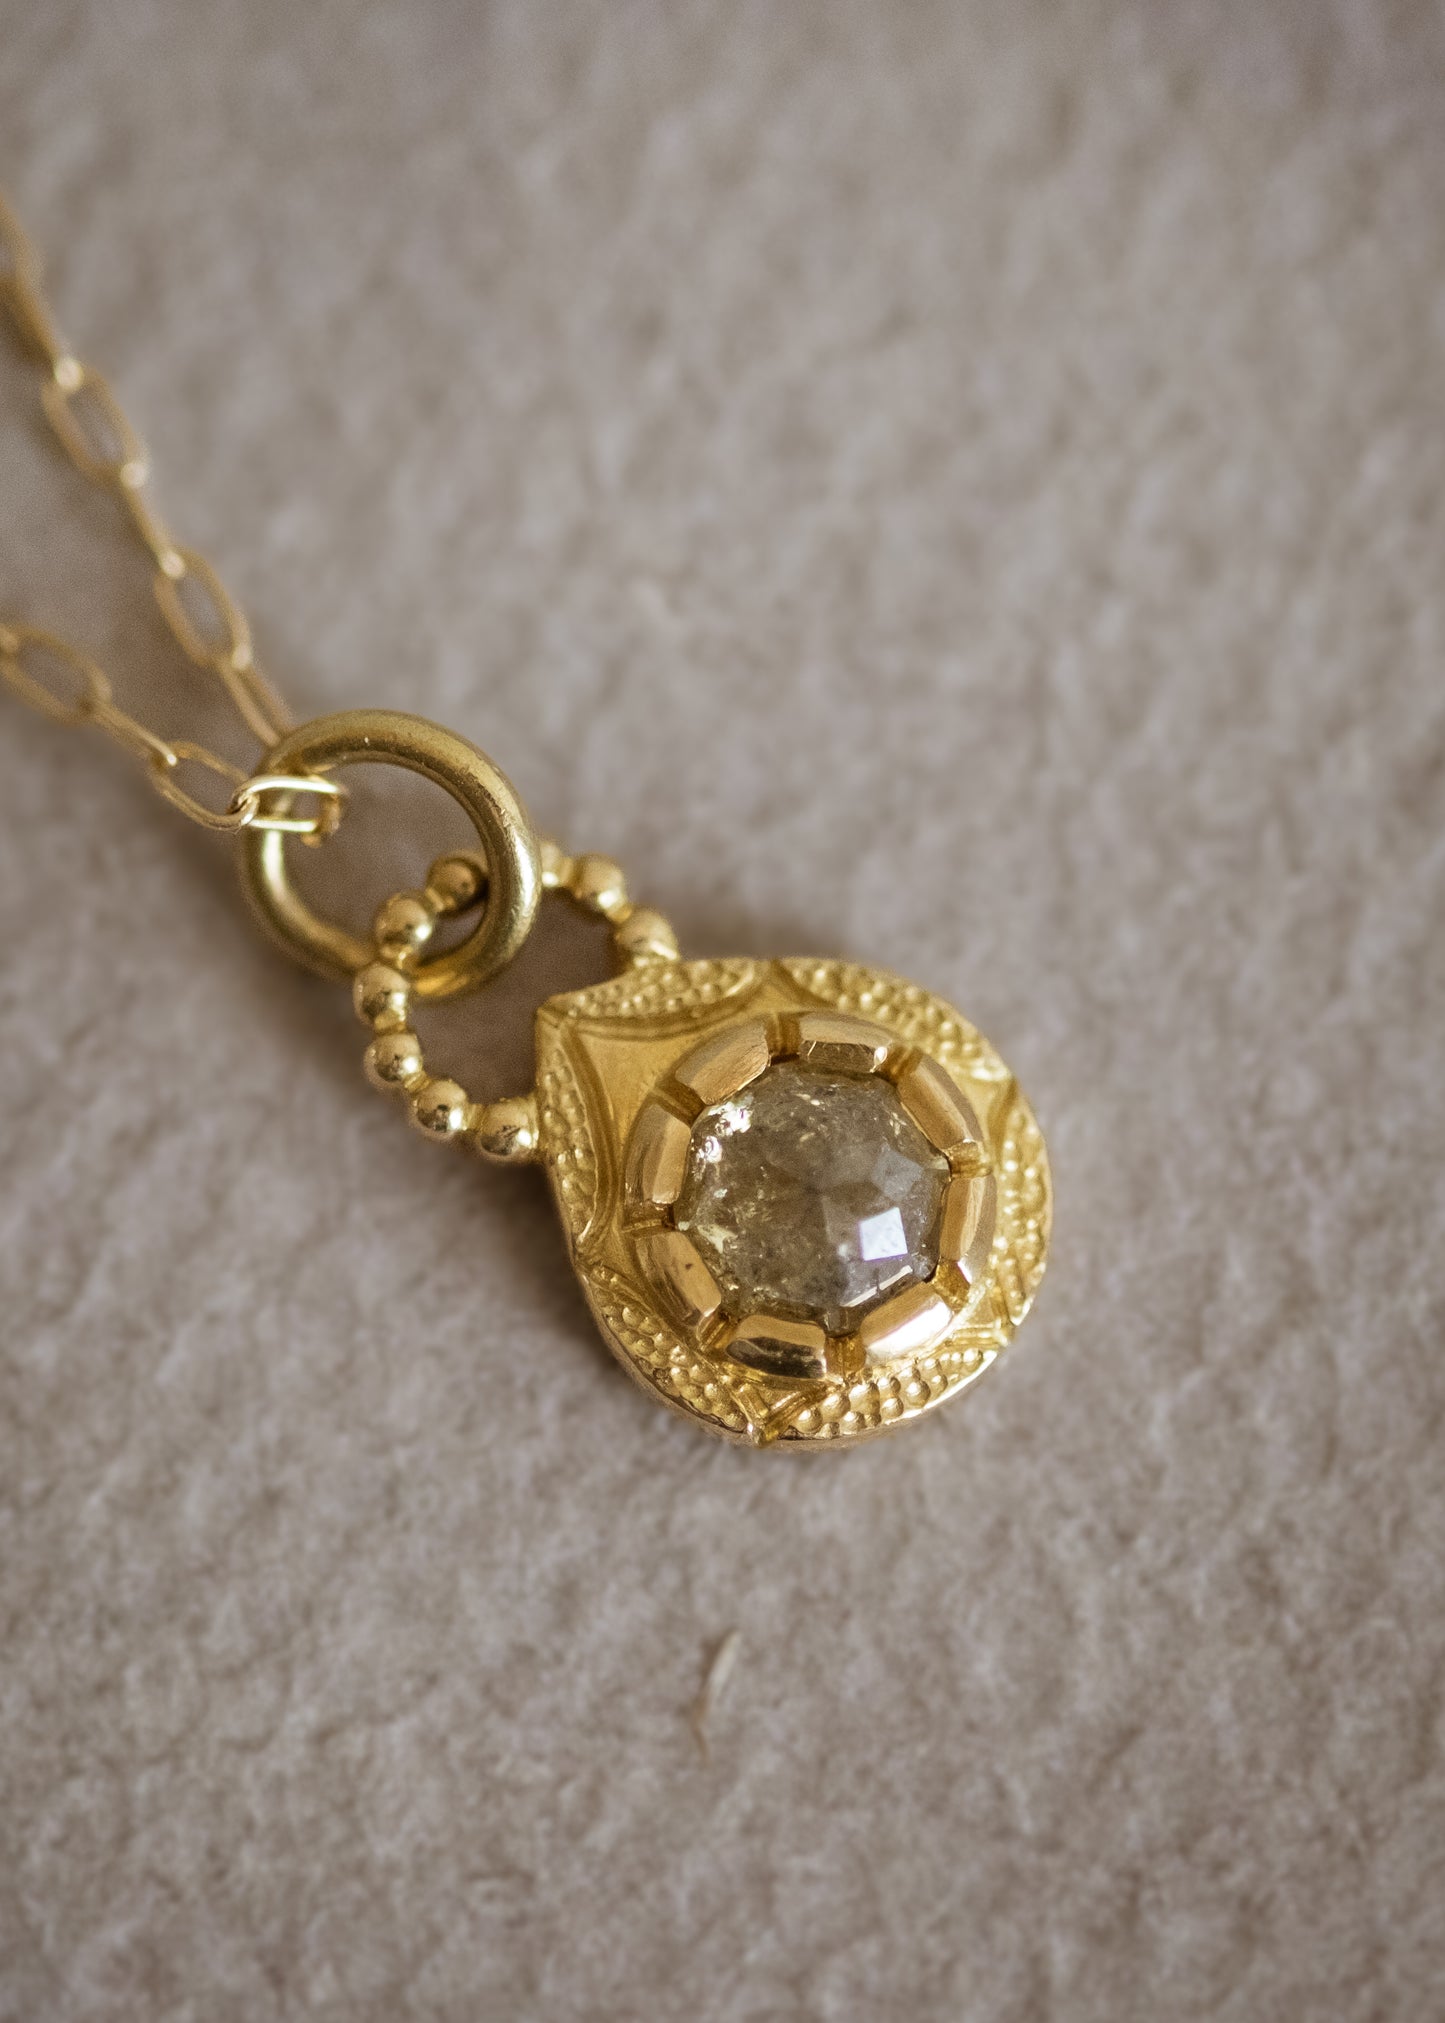 The Solo necklace revels in its unencumbered beauty. A stunning rose cut diamond is cradled in a gold droplet, revealing delicate texture and detail. An intricate beaded arch balances the pendant, linking it to its chain while showcasing its ornate character. 